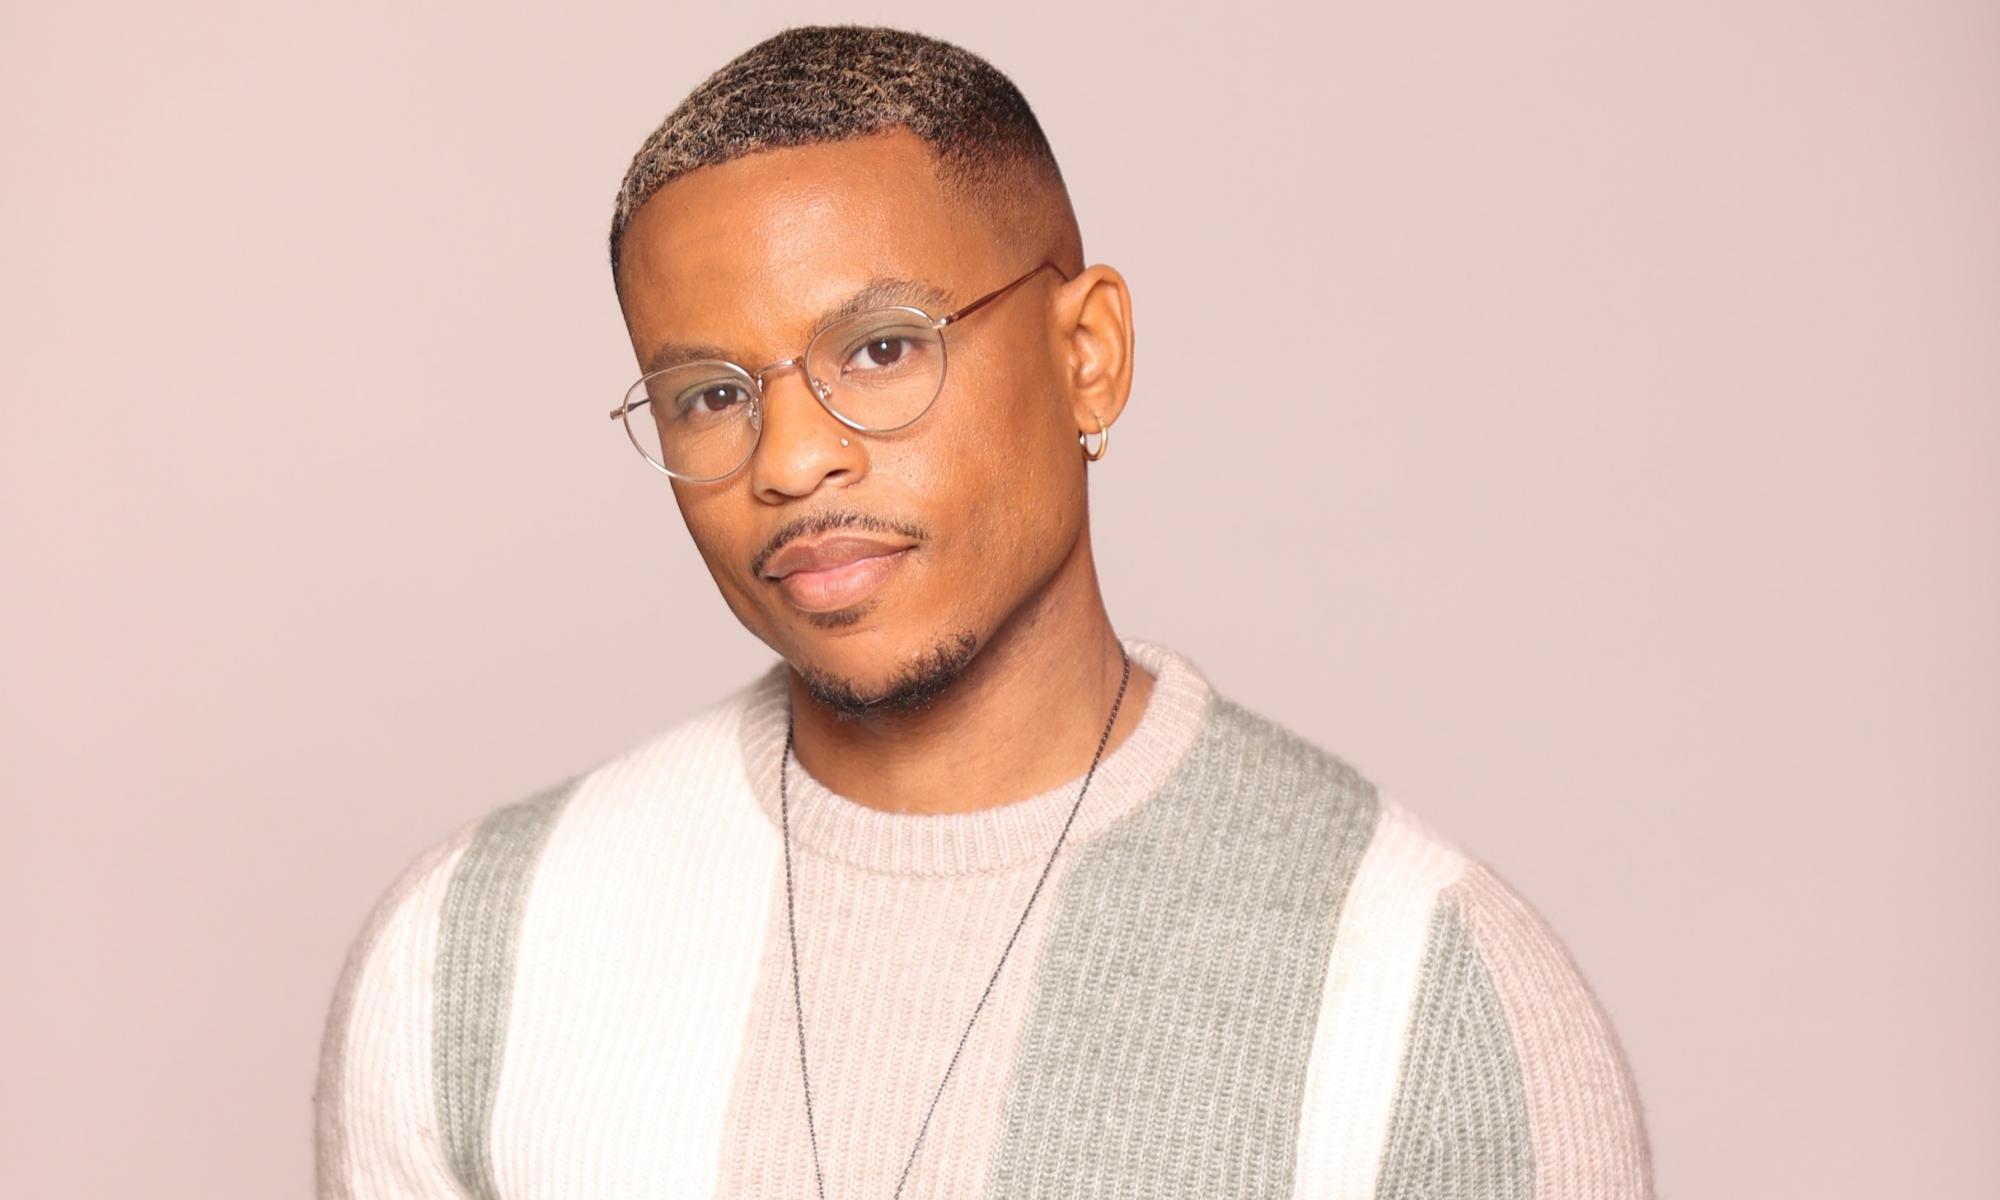 Yolo Akili Robinson wearing a sweater of pink, white, and grey stripes and metal rimmed glasses, standing and looking at the camera.